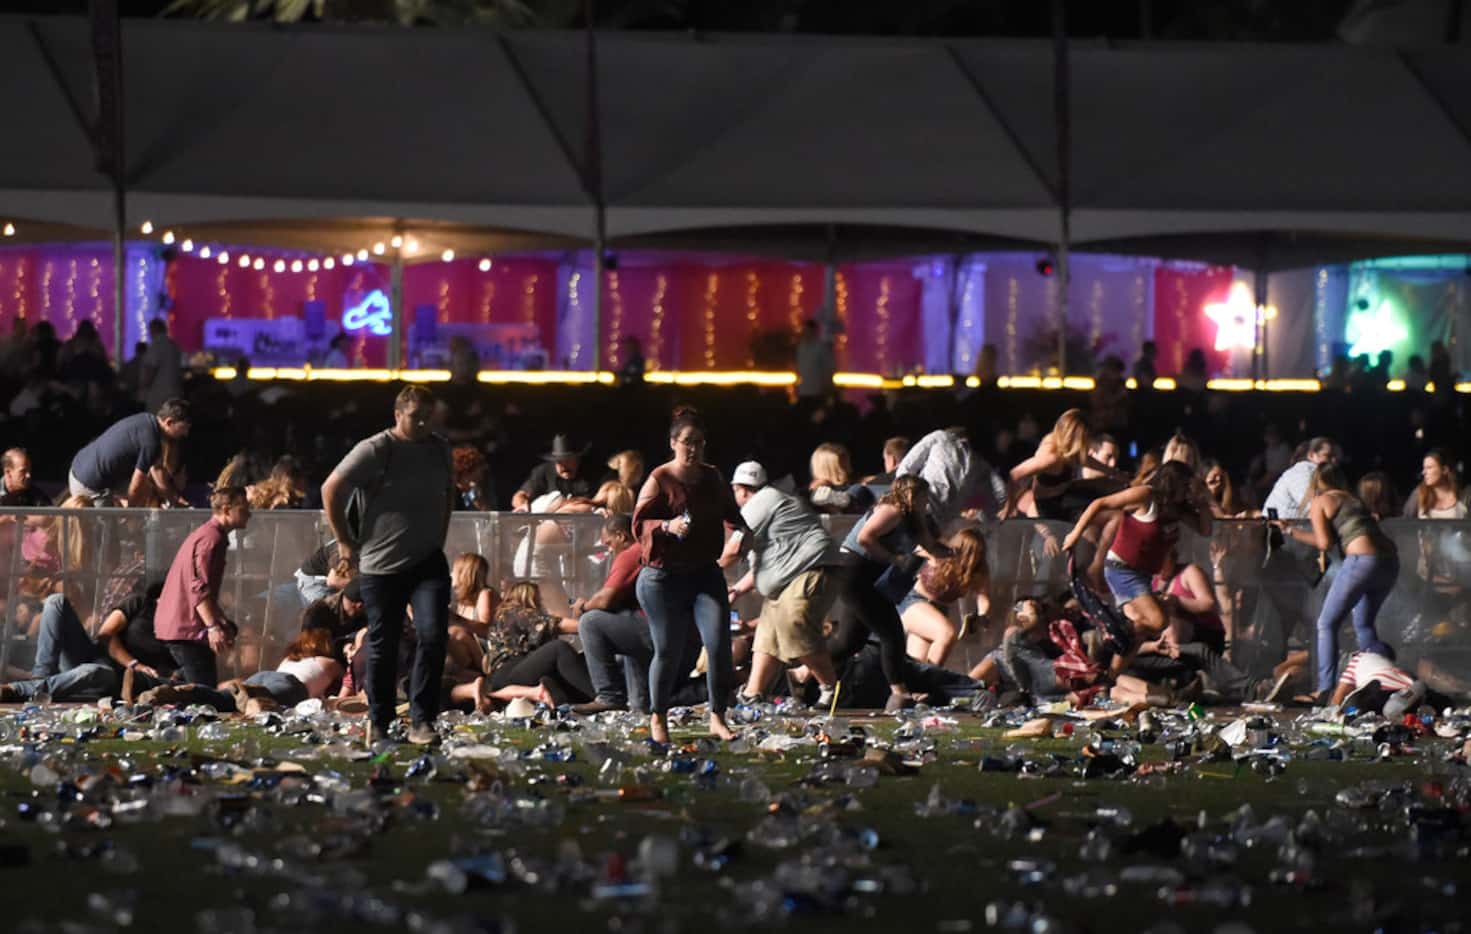 Chaos engulfed the Route 91 Harvest country music festival in Las Vegas after gunfire erupted. 